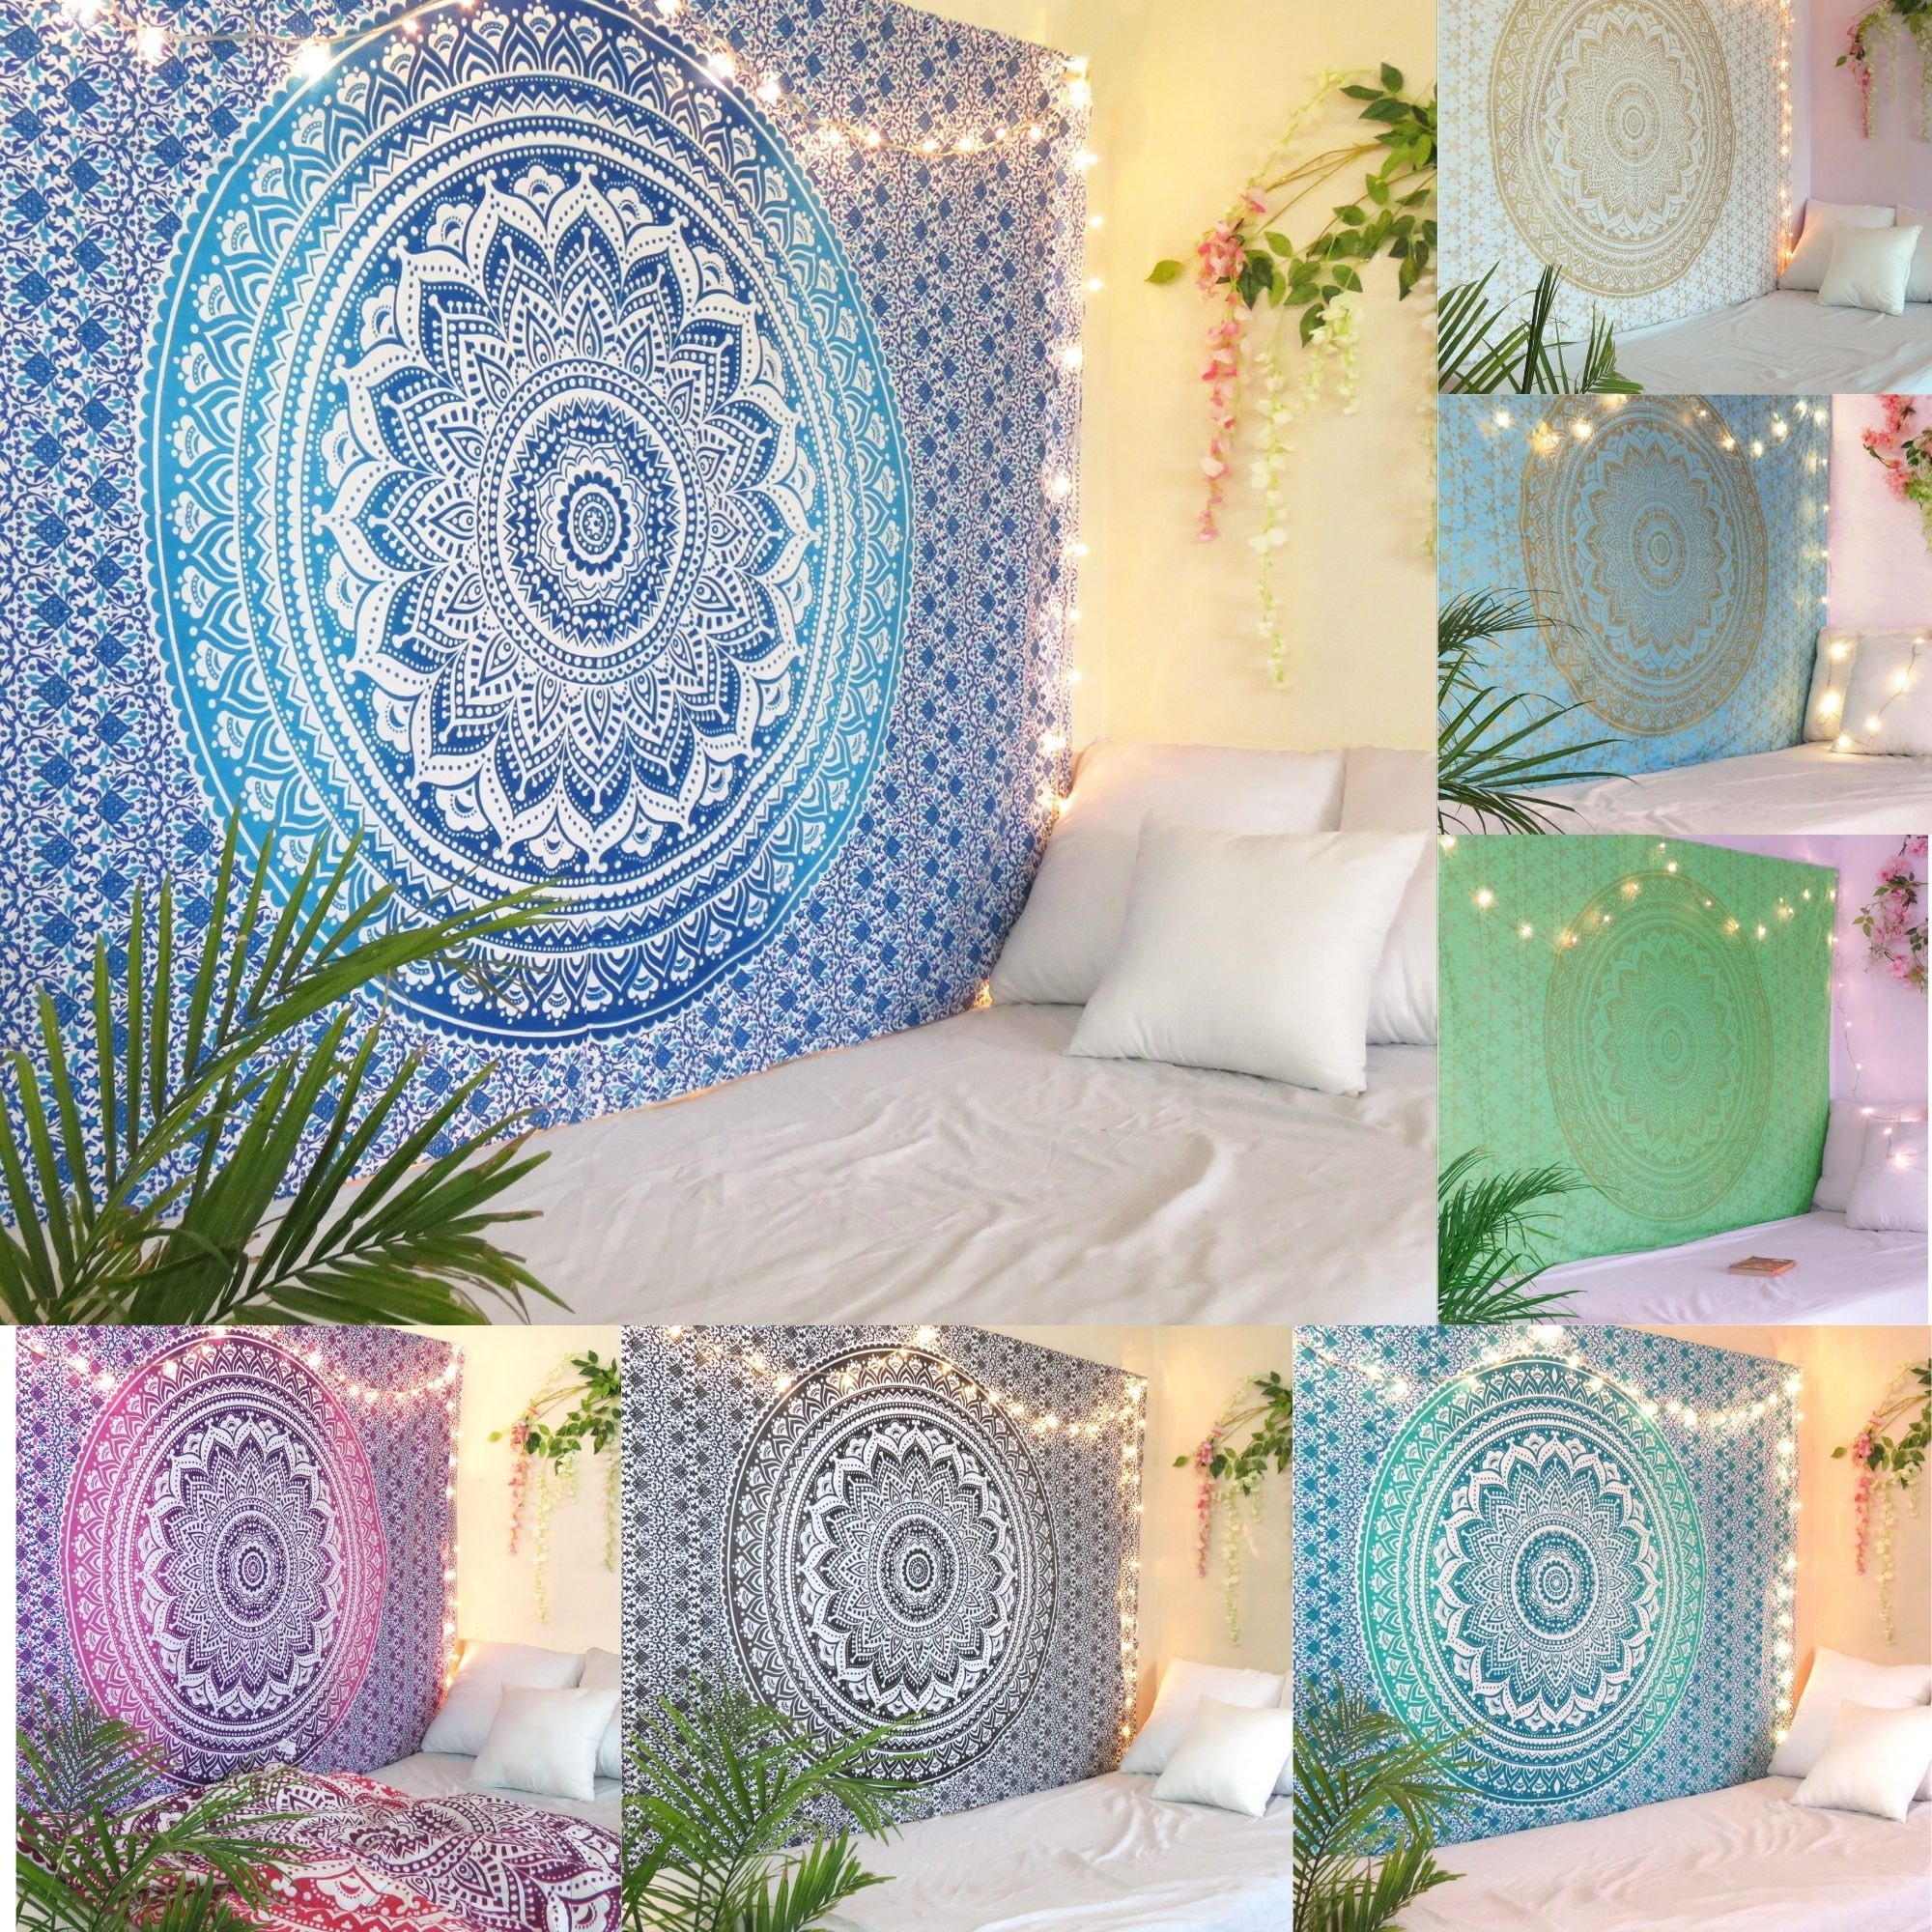 Indian Mandala Cotton Wall Hanging Hippie Tapestry Bedspread Bed Sheet Decor 